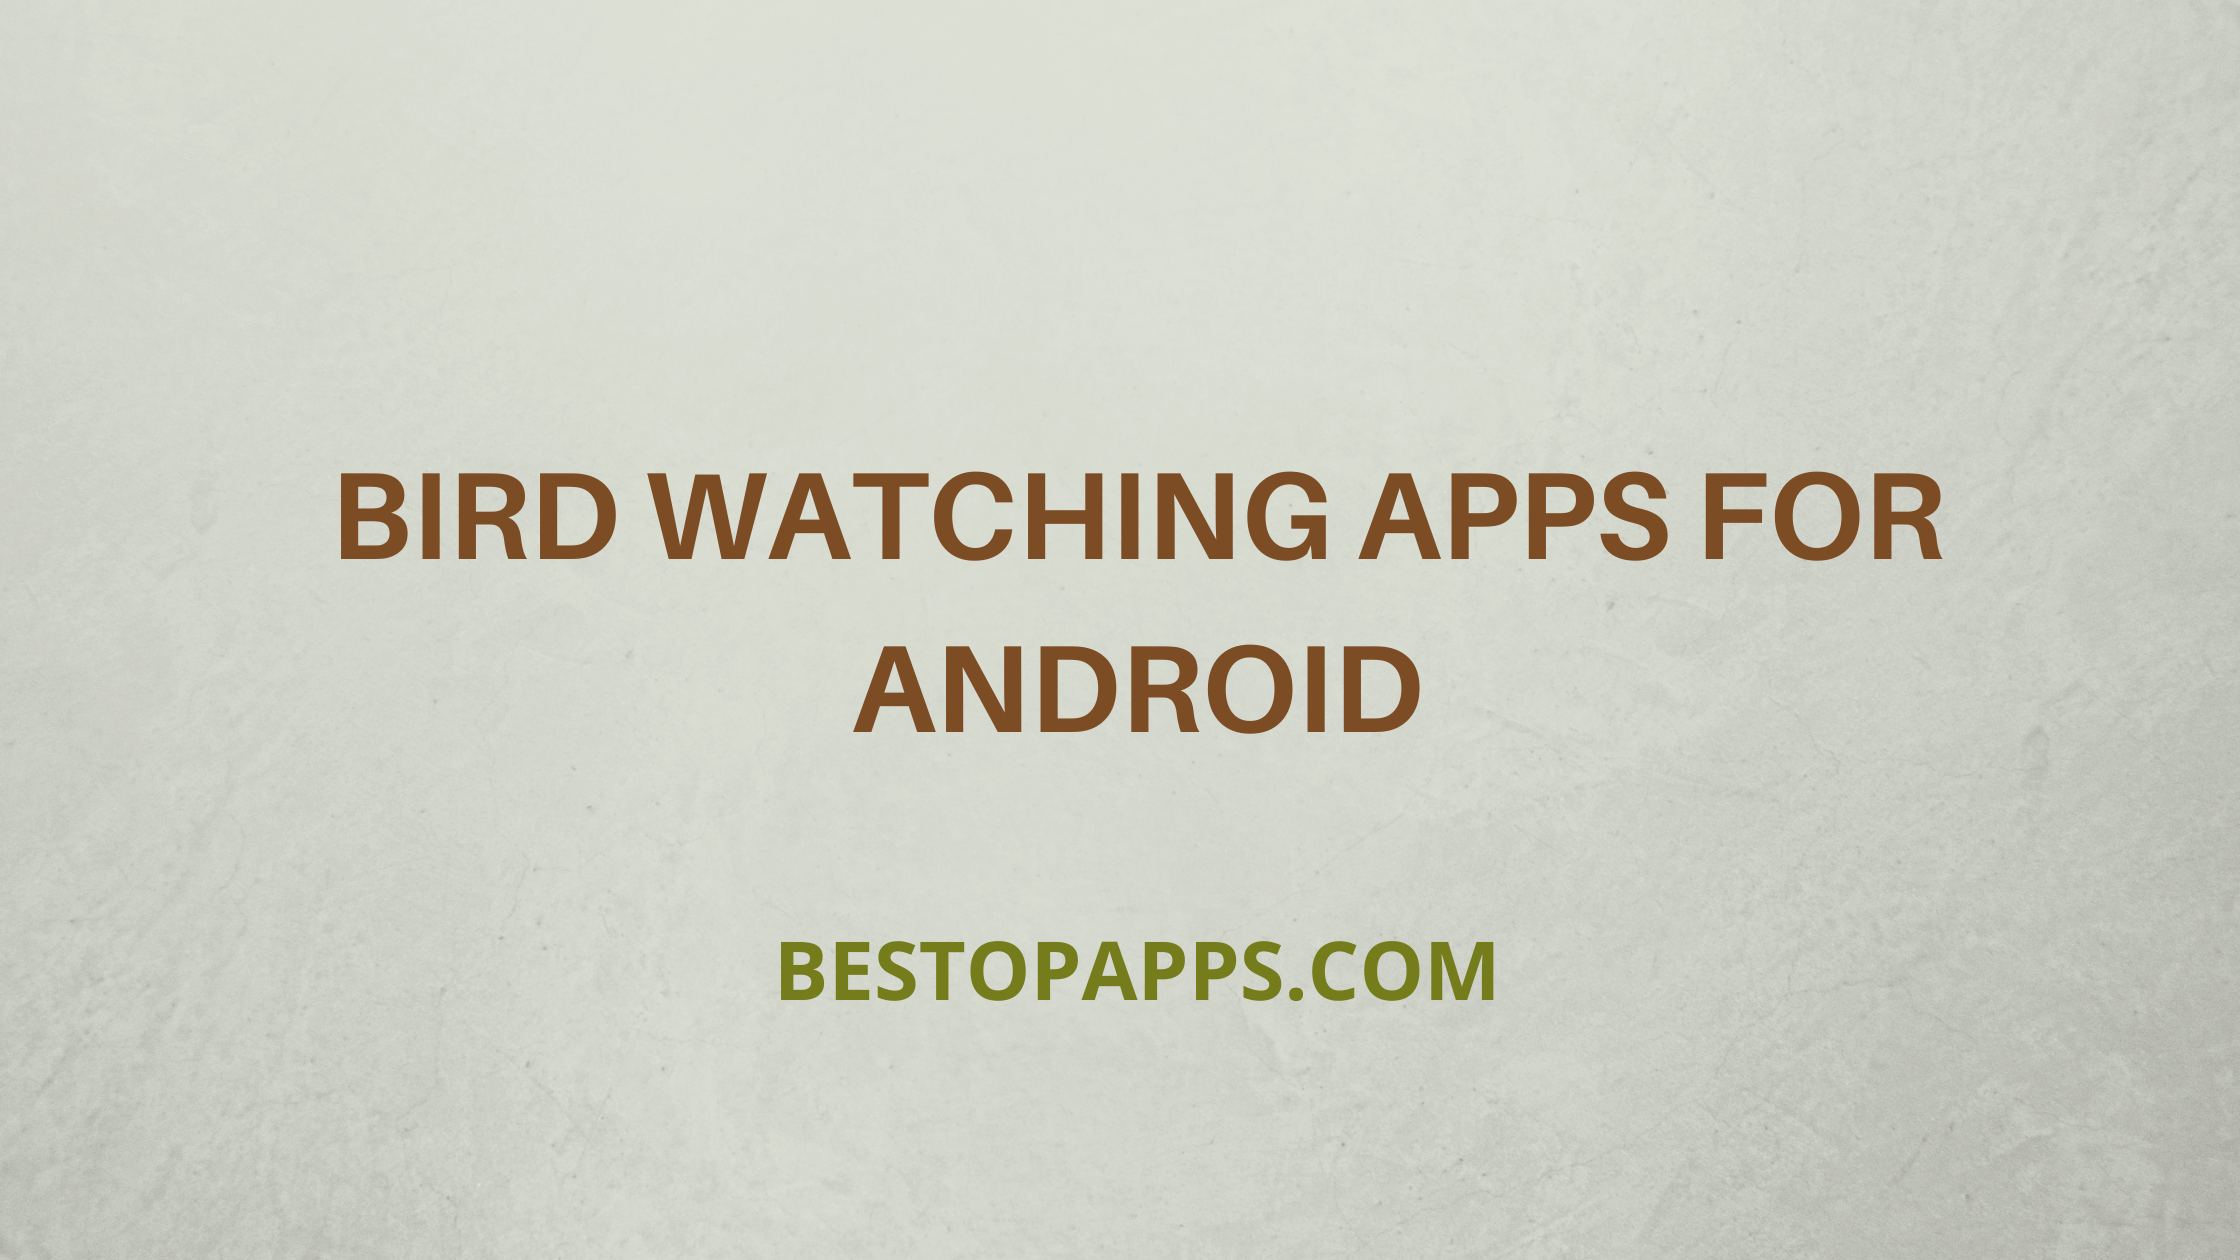 Bird Watching Apps for Android